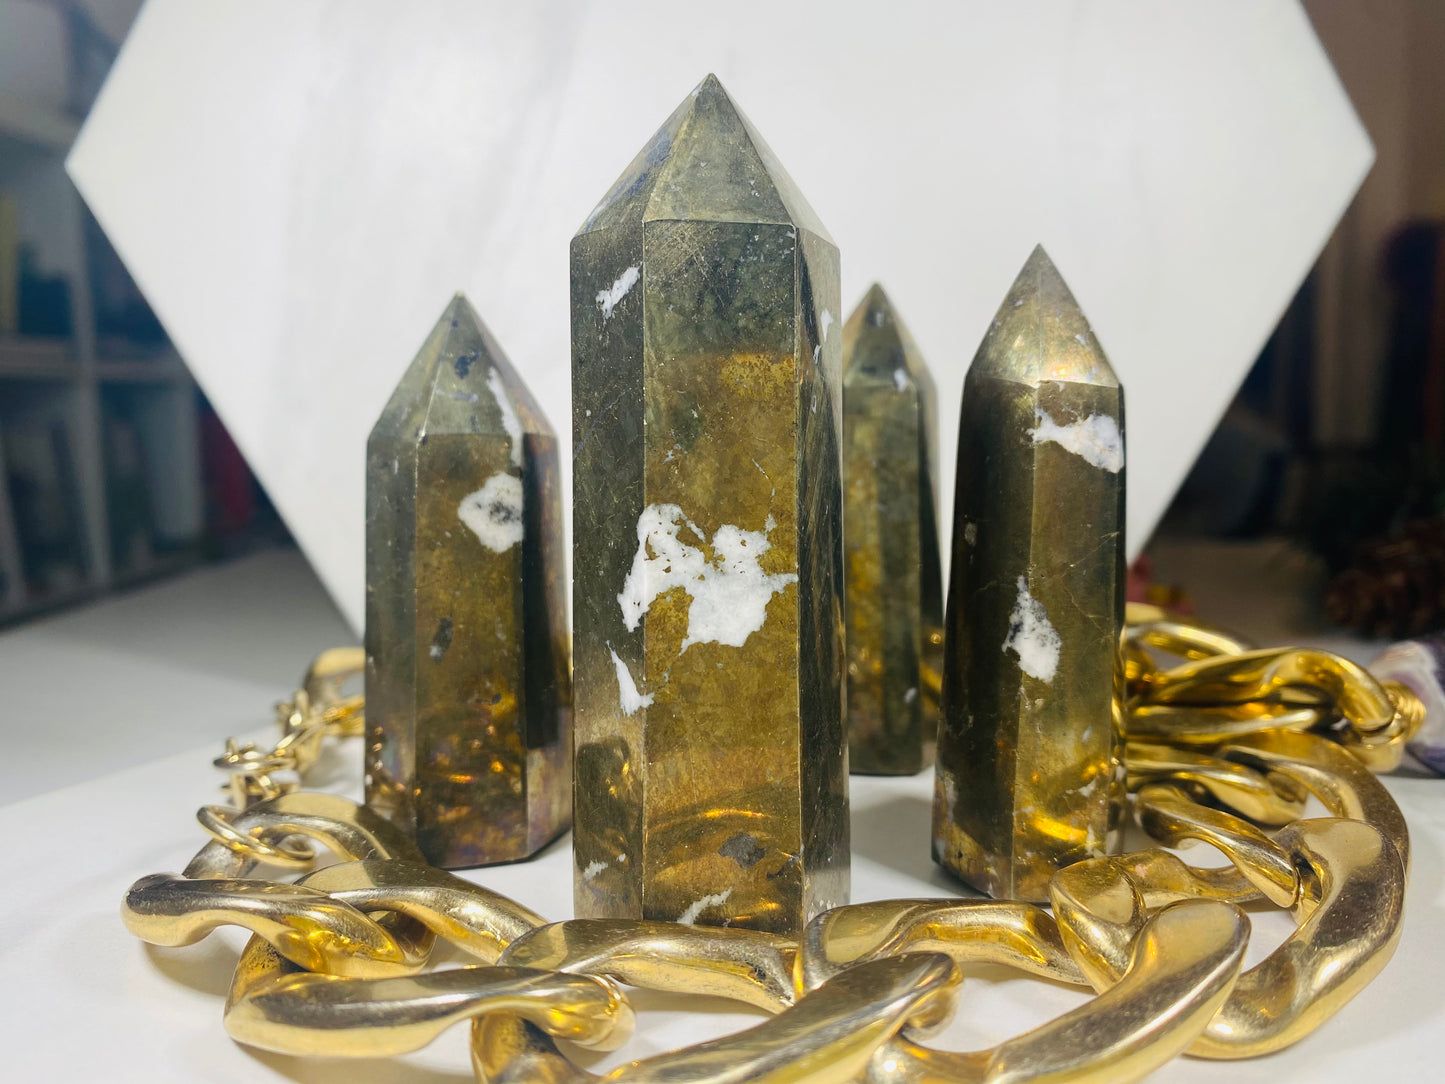 Pyrite Crystal Tower Point #2